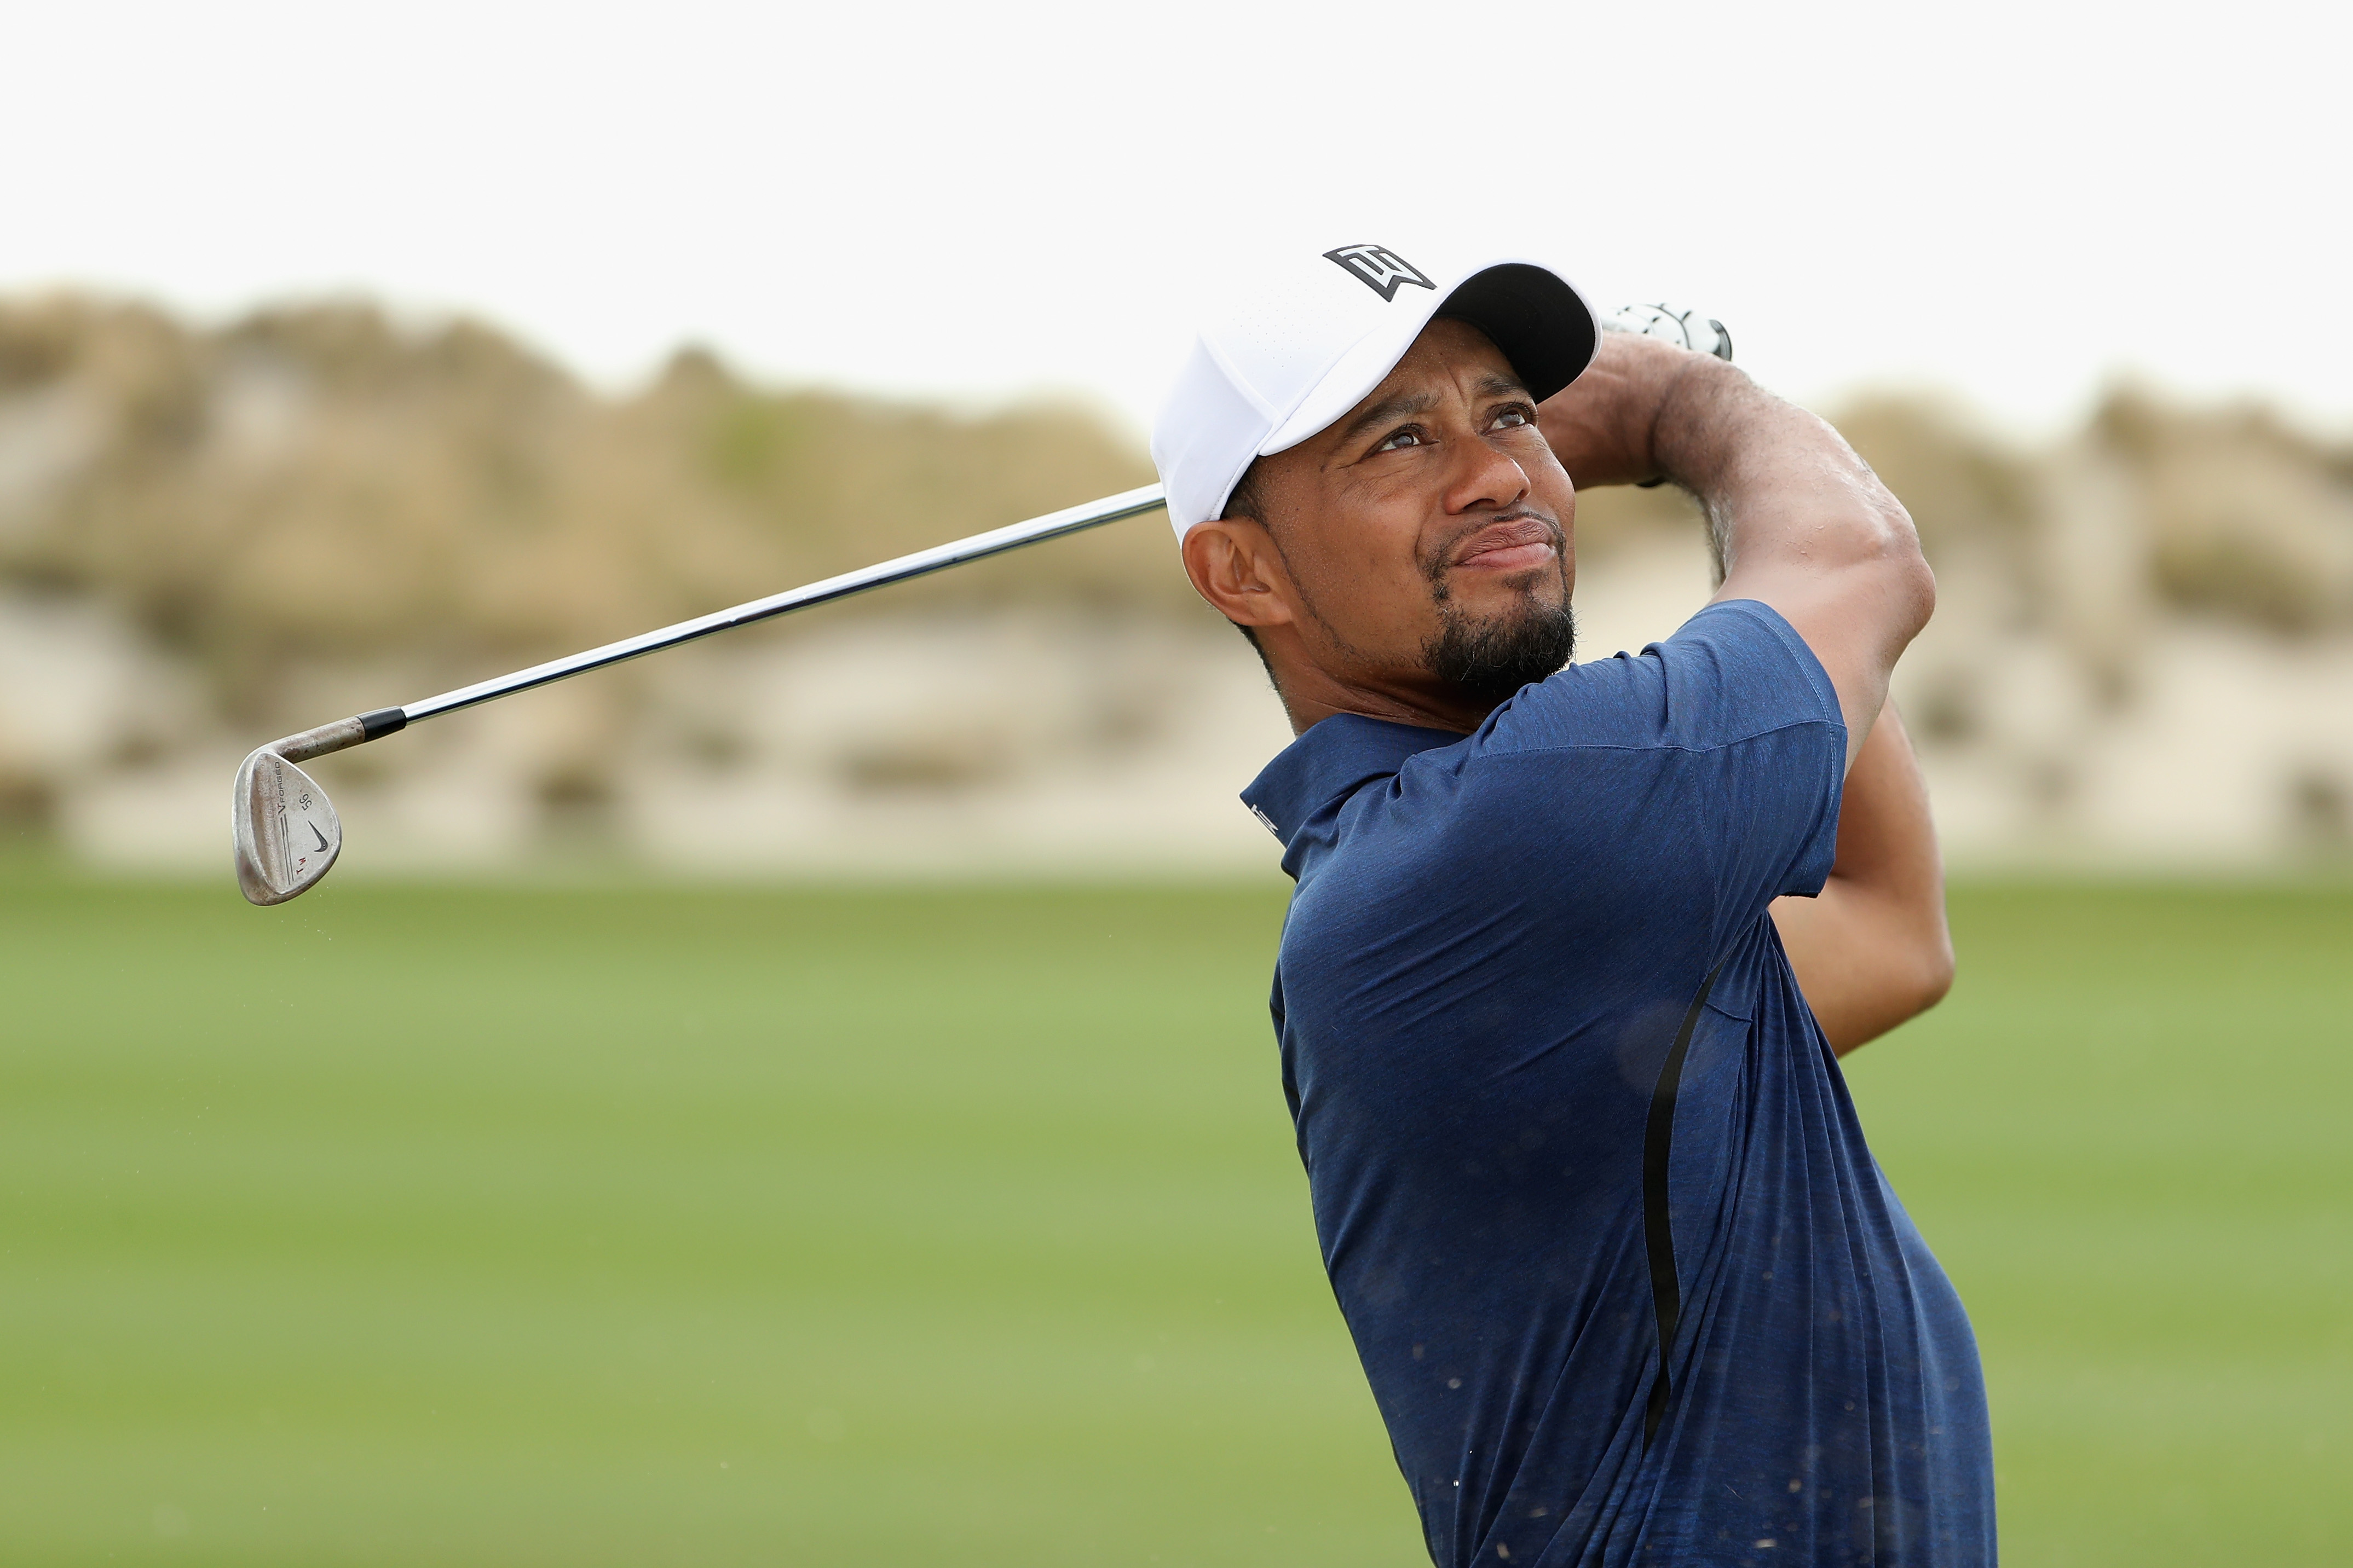 Tiger Woods Watch Live updates from Day 2 at the Hero World Challenge This is the Loop Golf Digest